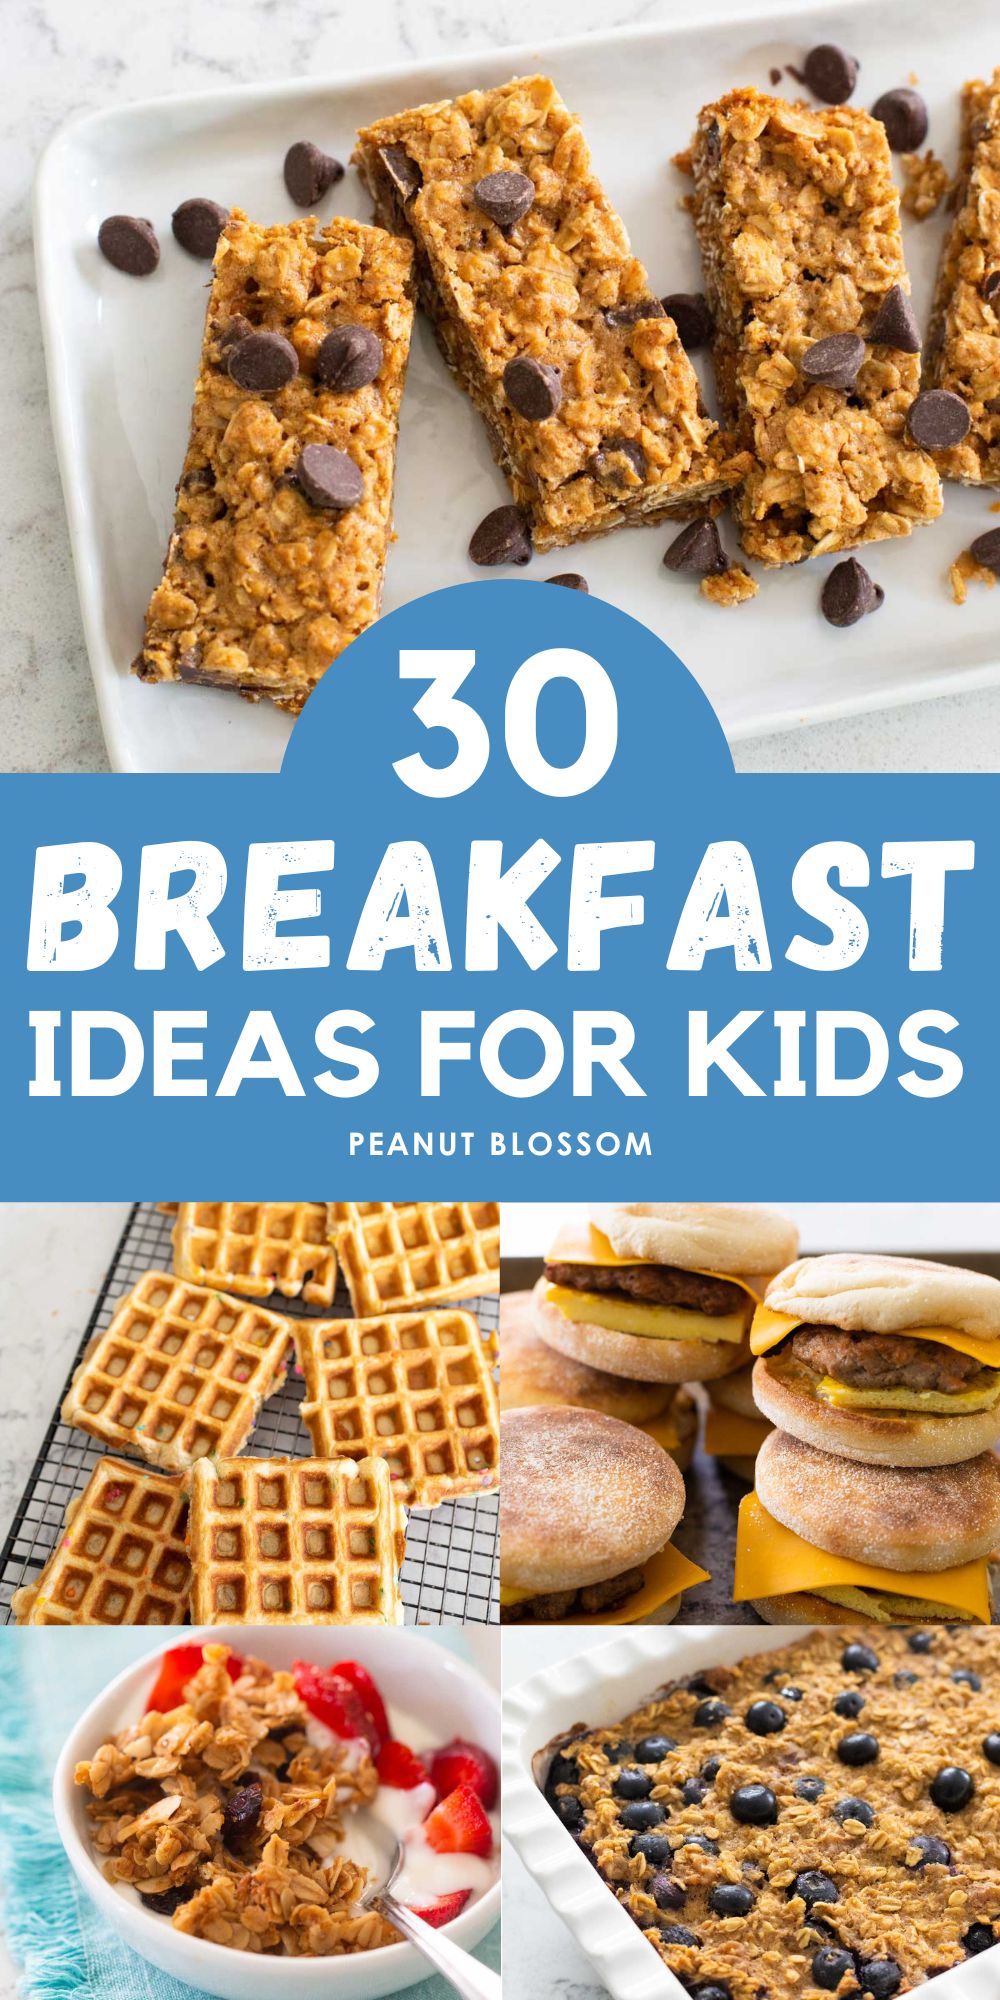 The photo collage shows several easy breakfast ideas for kids including granola bars, waffles, breakfast sandwiches, yogurt parfaits, and baked oatmeal.